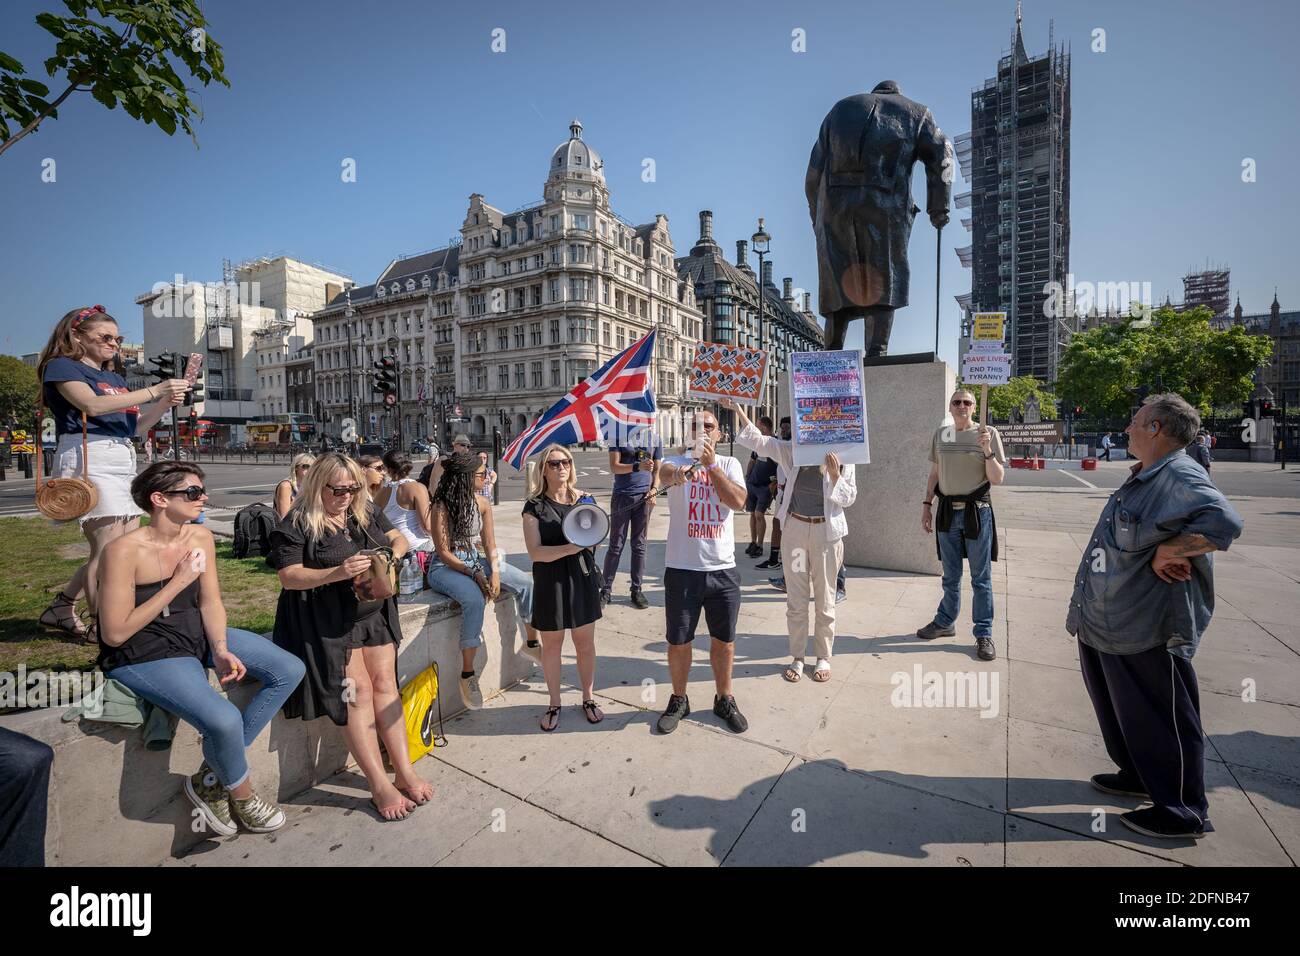 Coronavirus: Anti-Lockdown protest in Parliament Square. A small gathering of anti-lockdown protesters from Stand-Up X movement gather in the square. Stock Photo